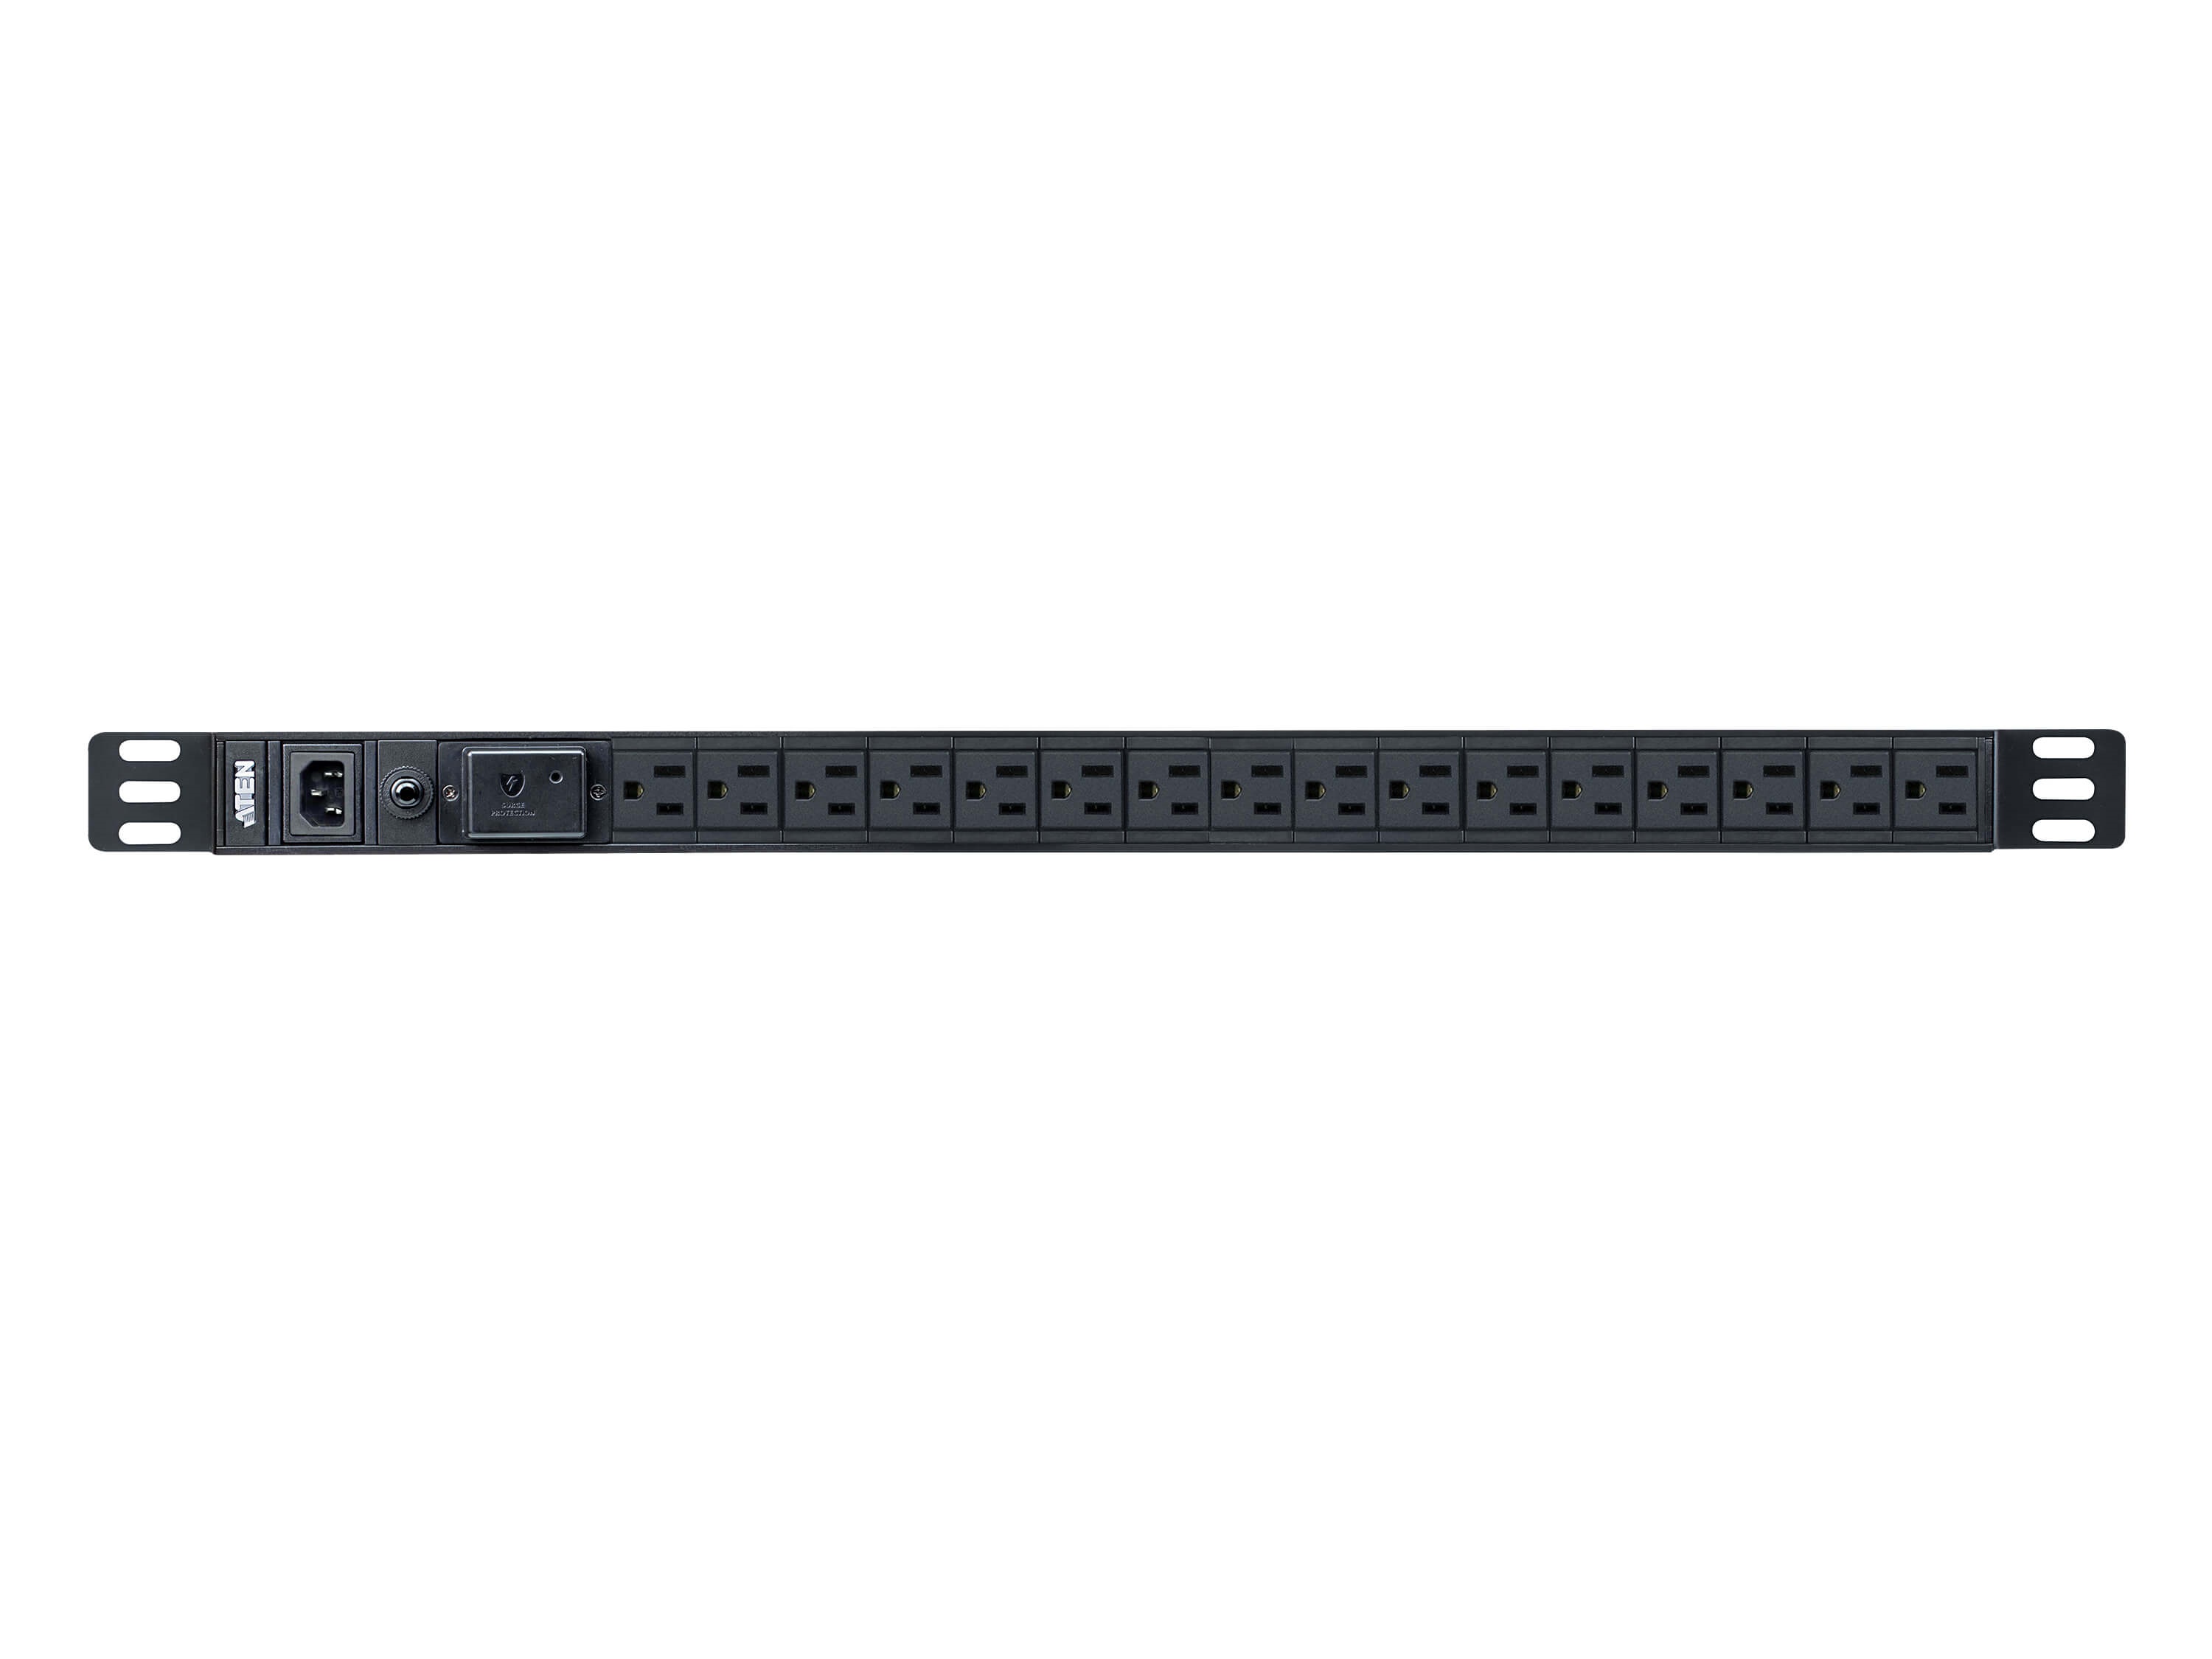 PE0116SA Basic PDU with Surge Protection/100-120 VAC/15A Max by Aten